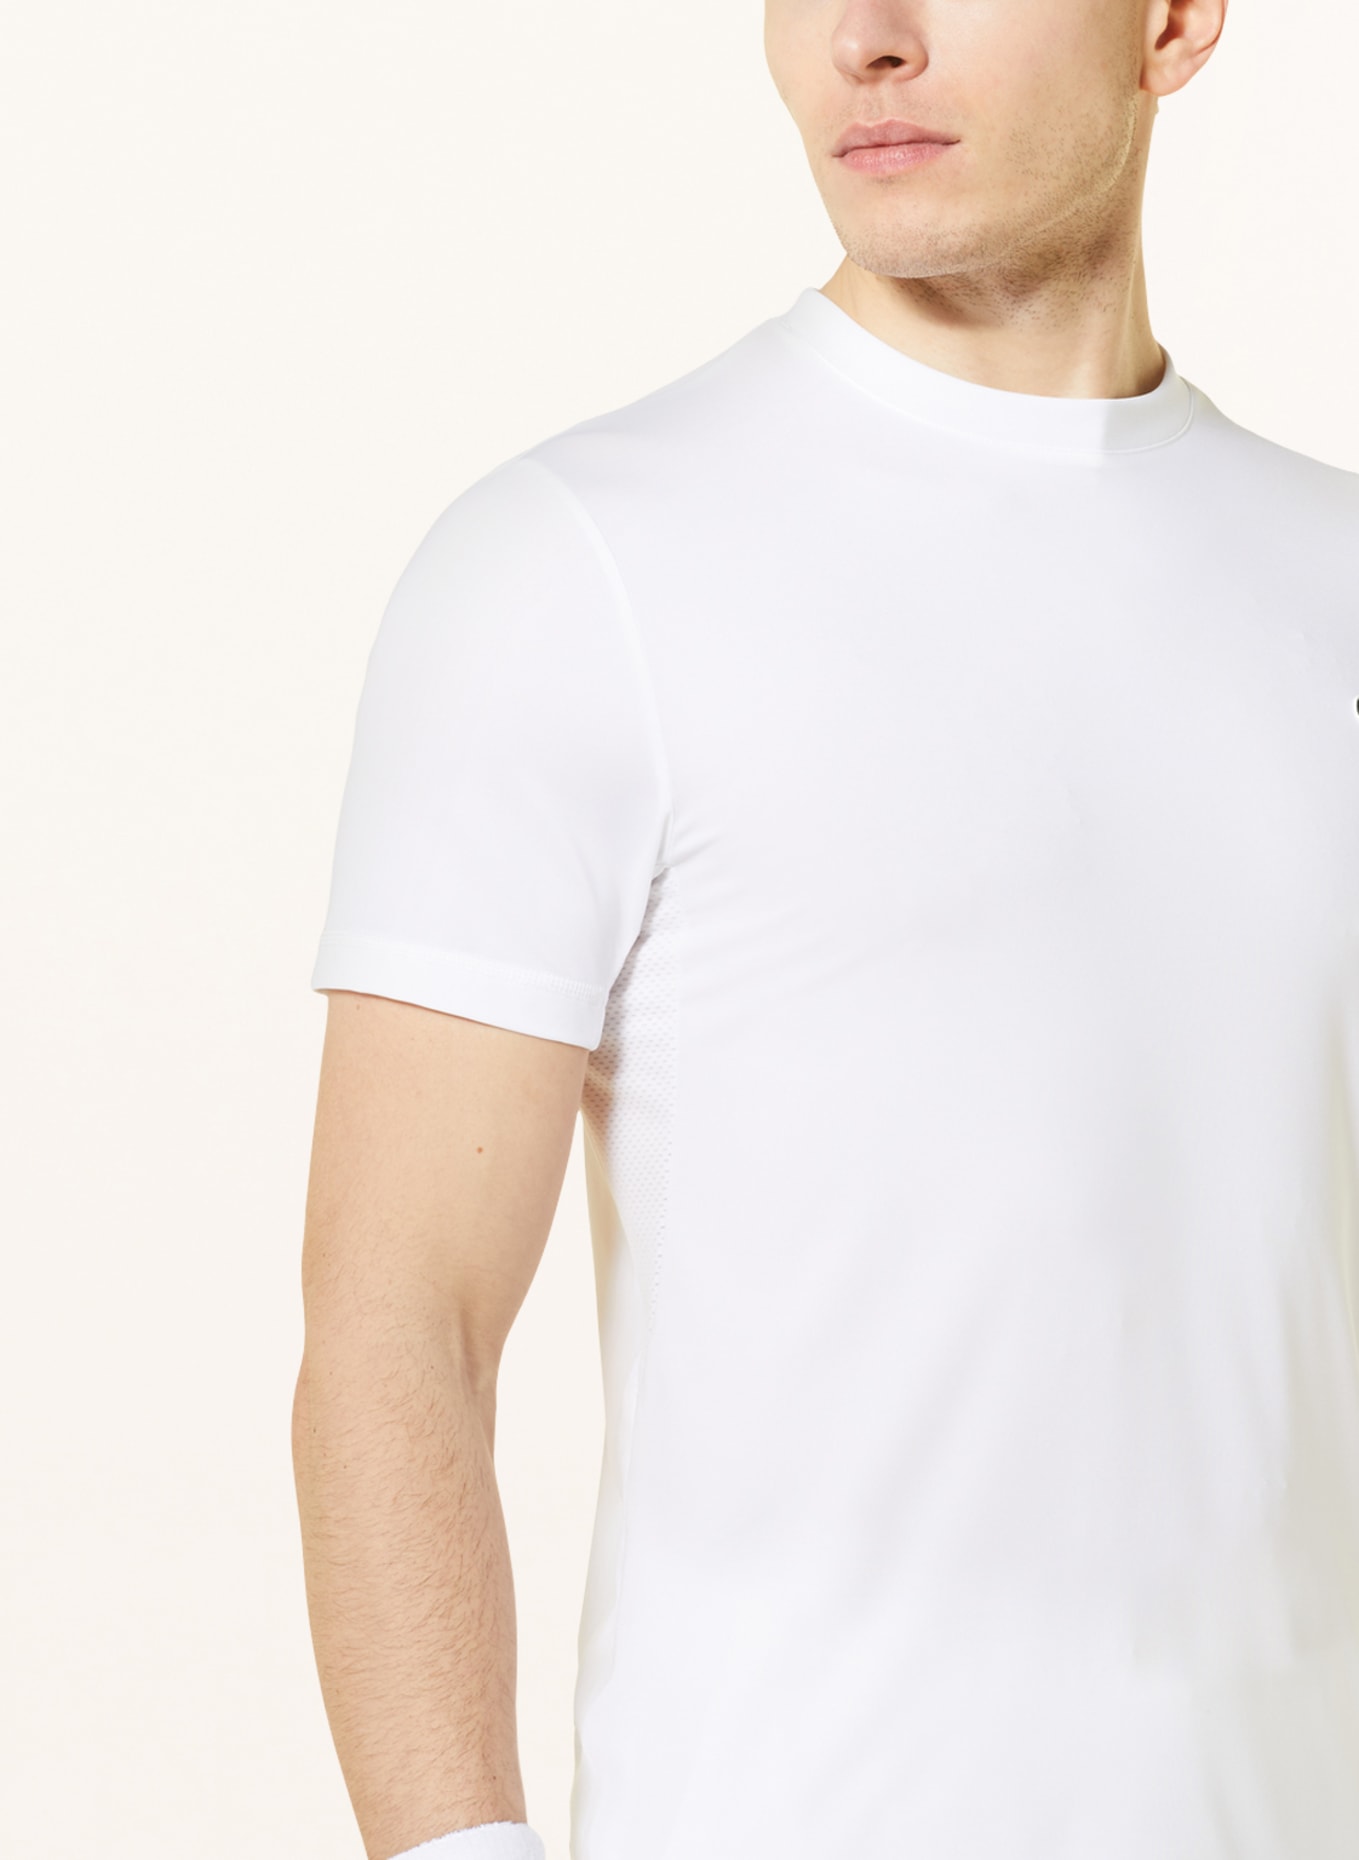 LACOSTE T-Shirt mit Mesh in weiss